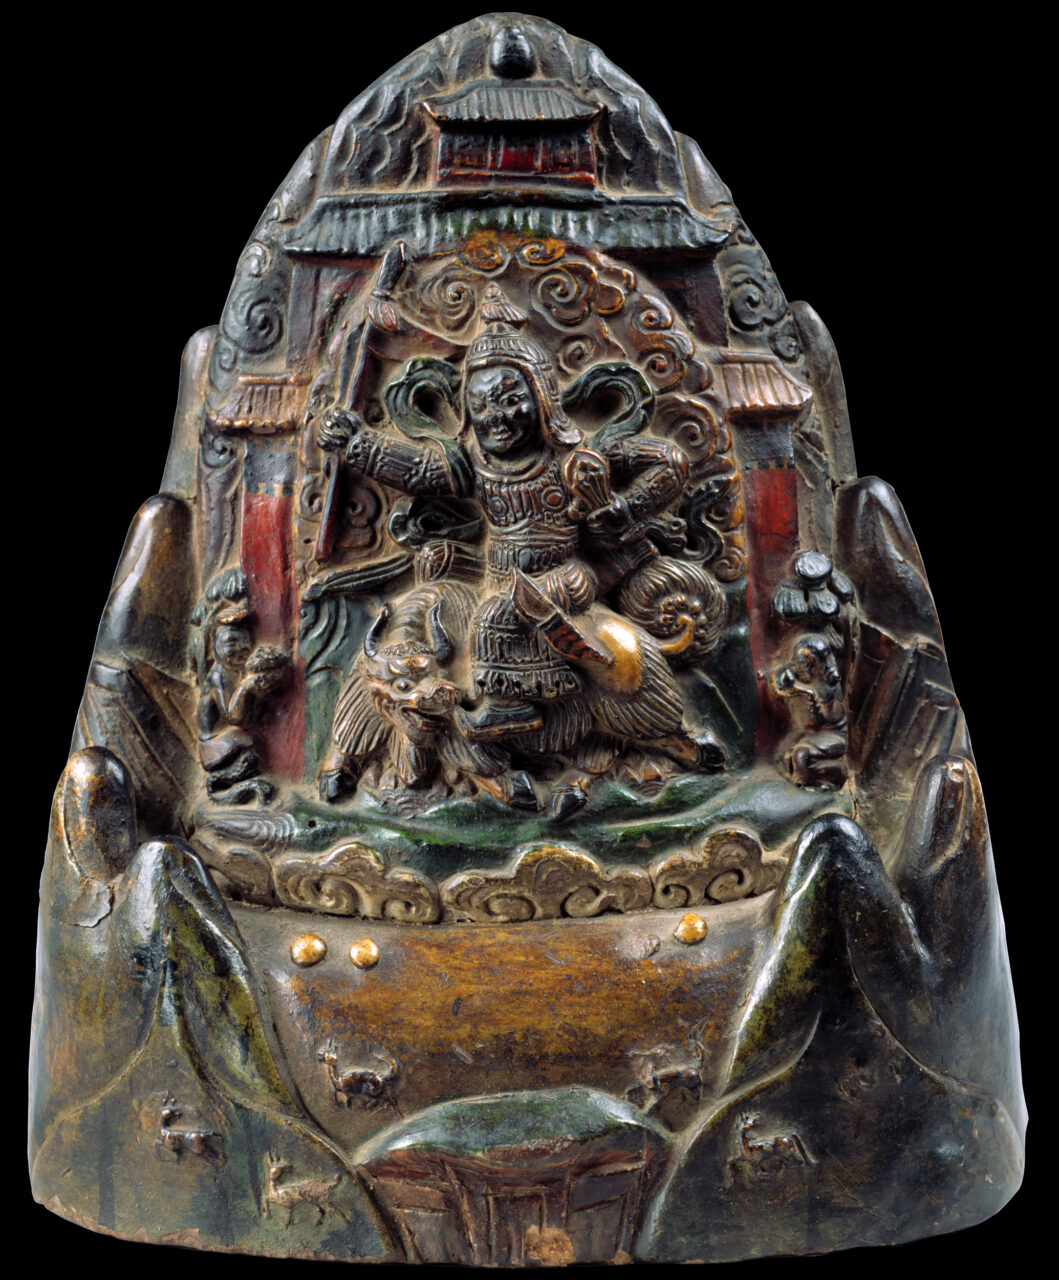 Polychrome sculpture depicting deity riding on yak before pagoda situated between mountain peaks